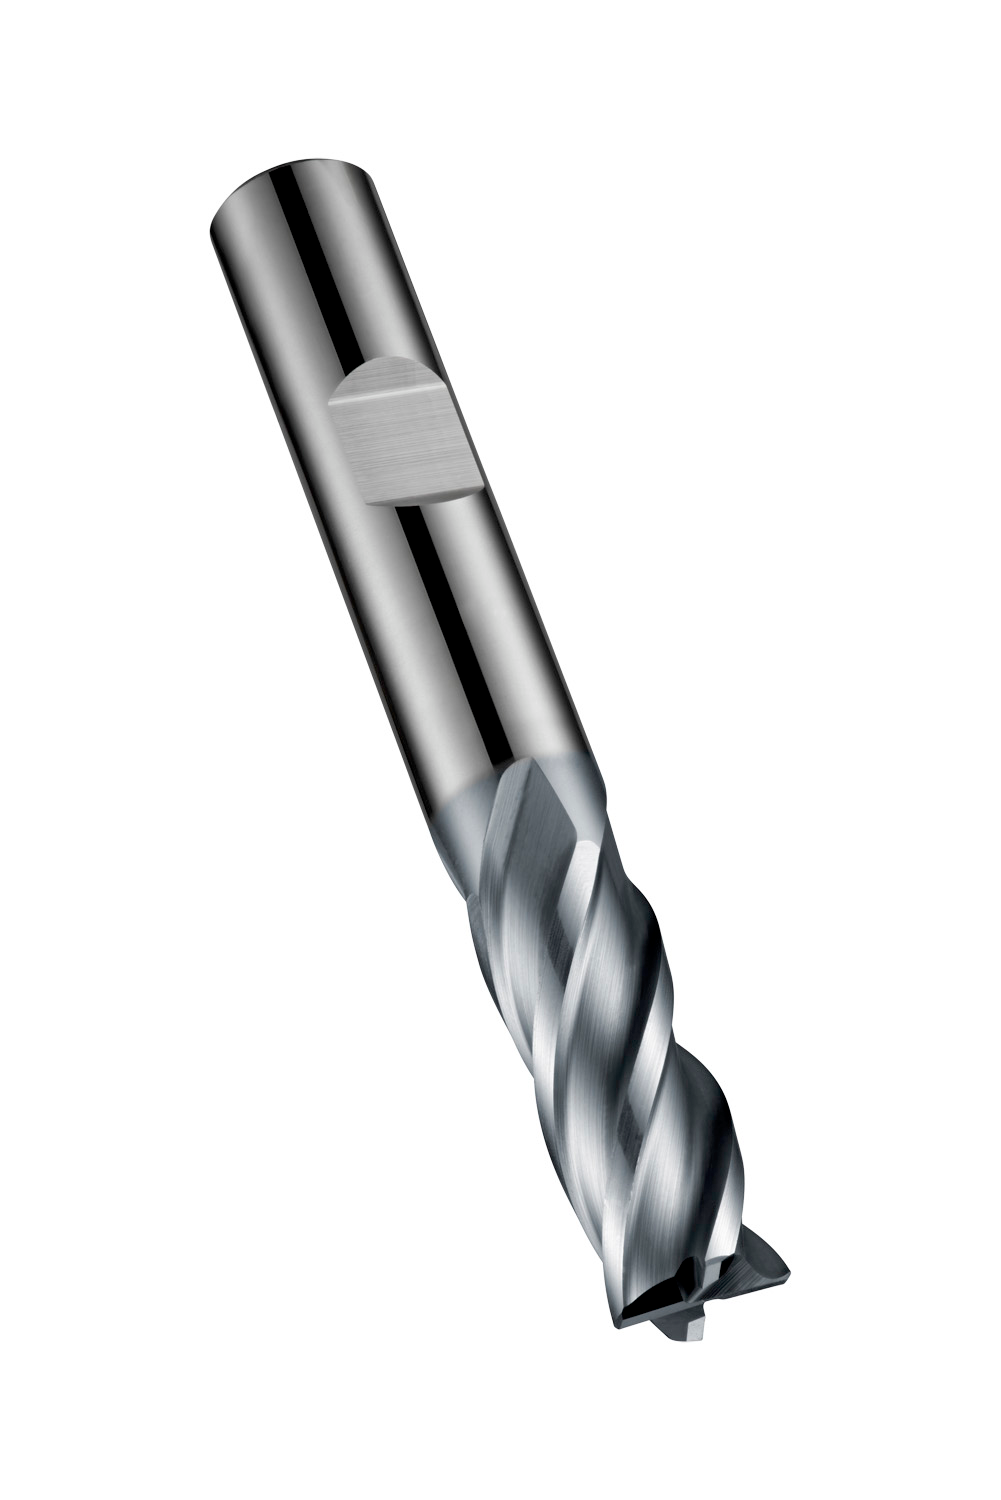 S814HB6.0 - End Mills